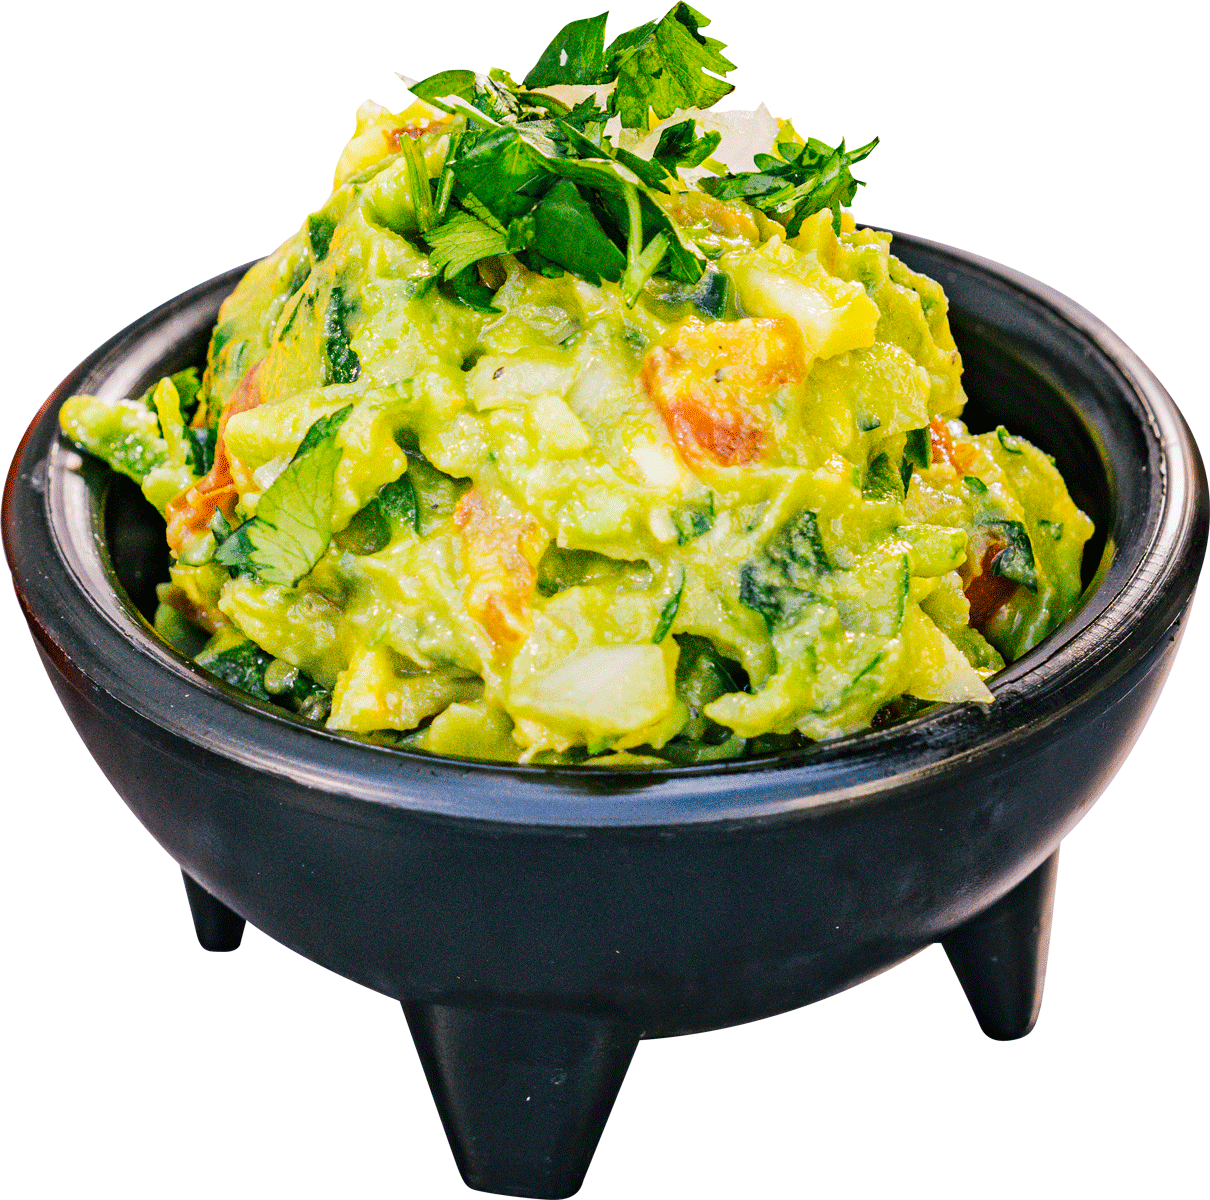 A black bowl filled with guacamole on a white background